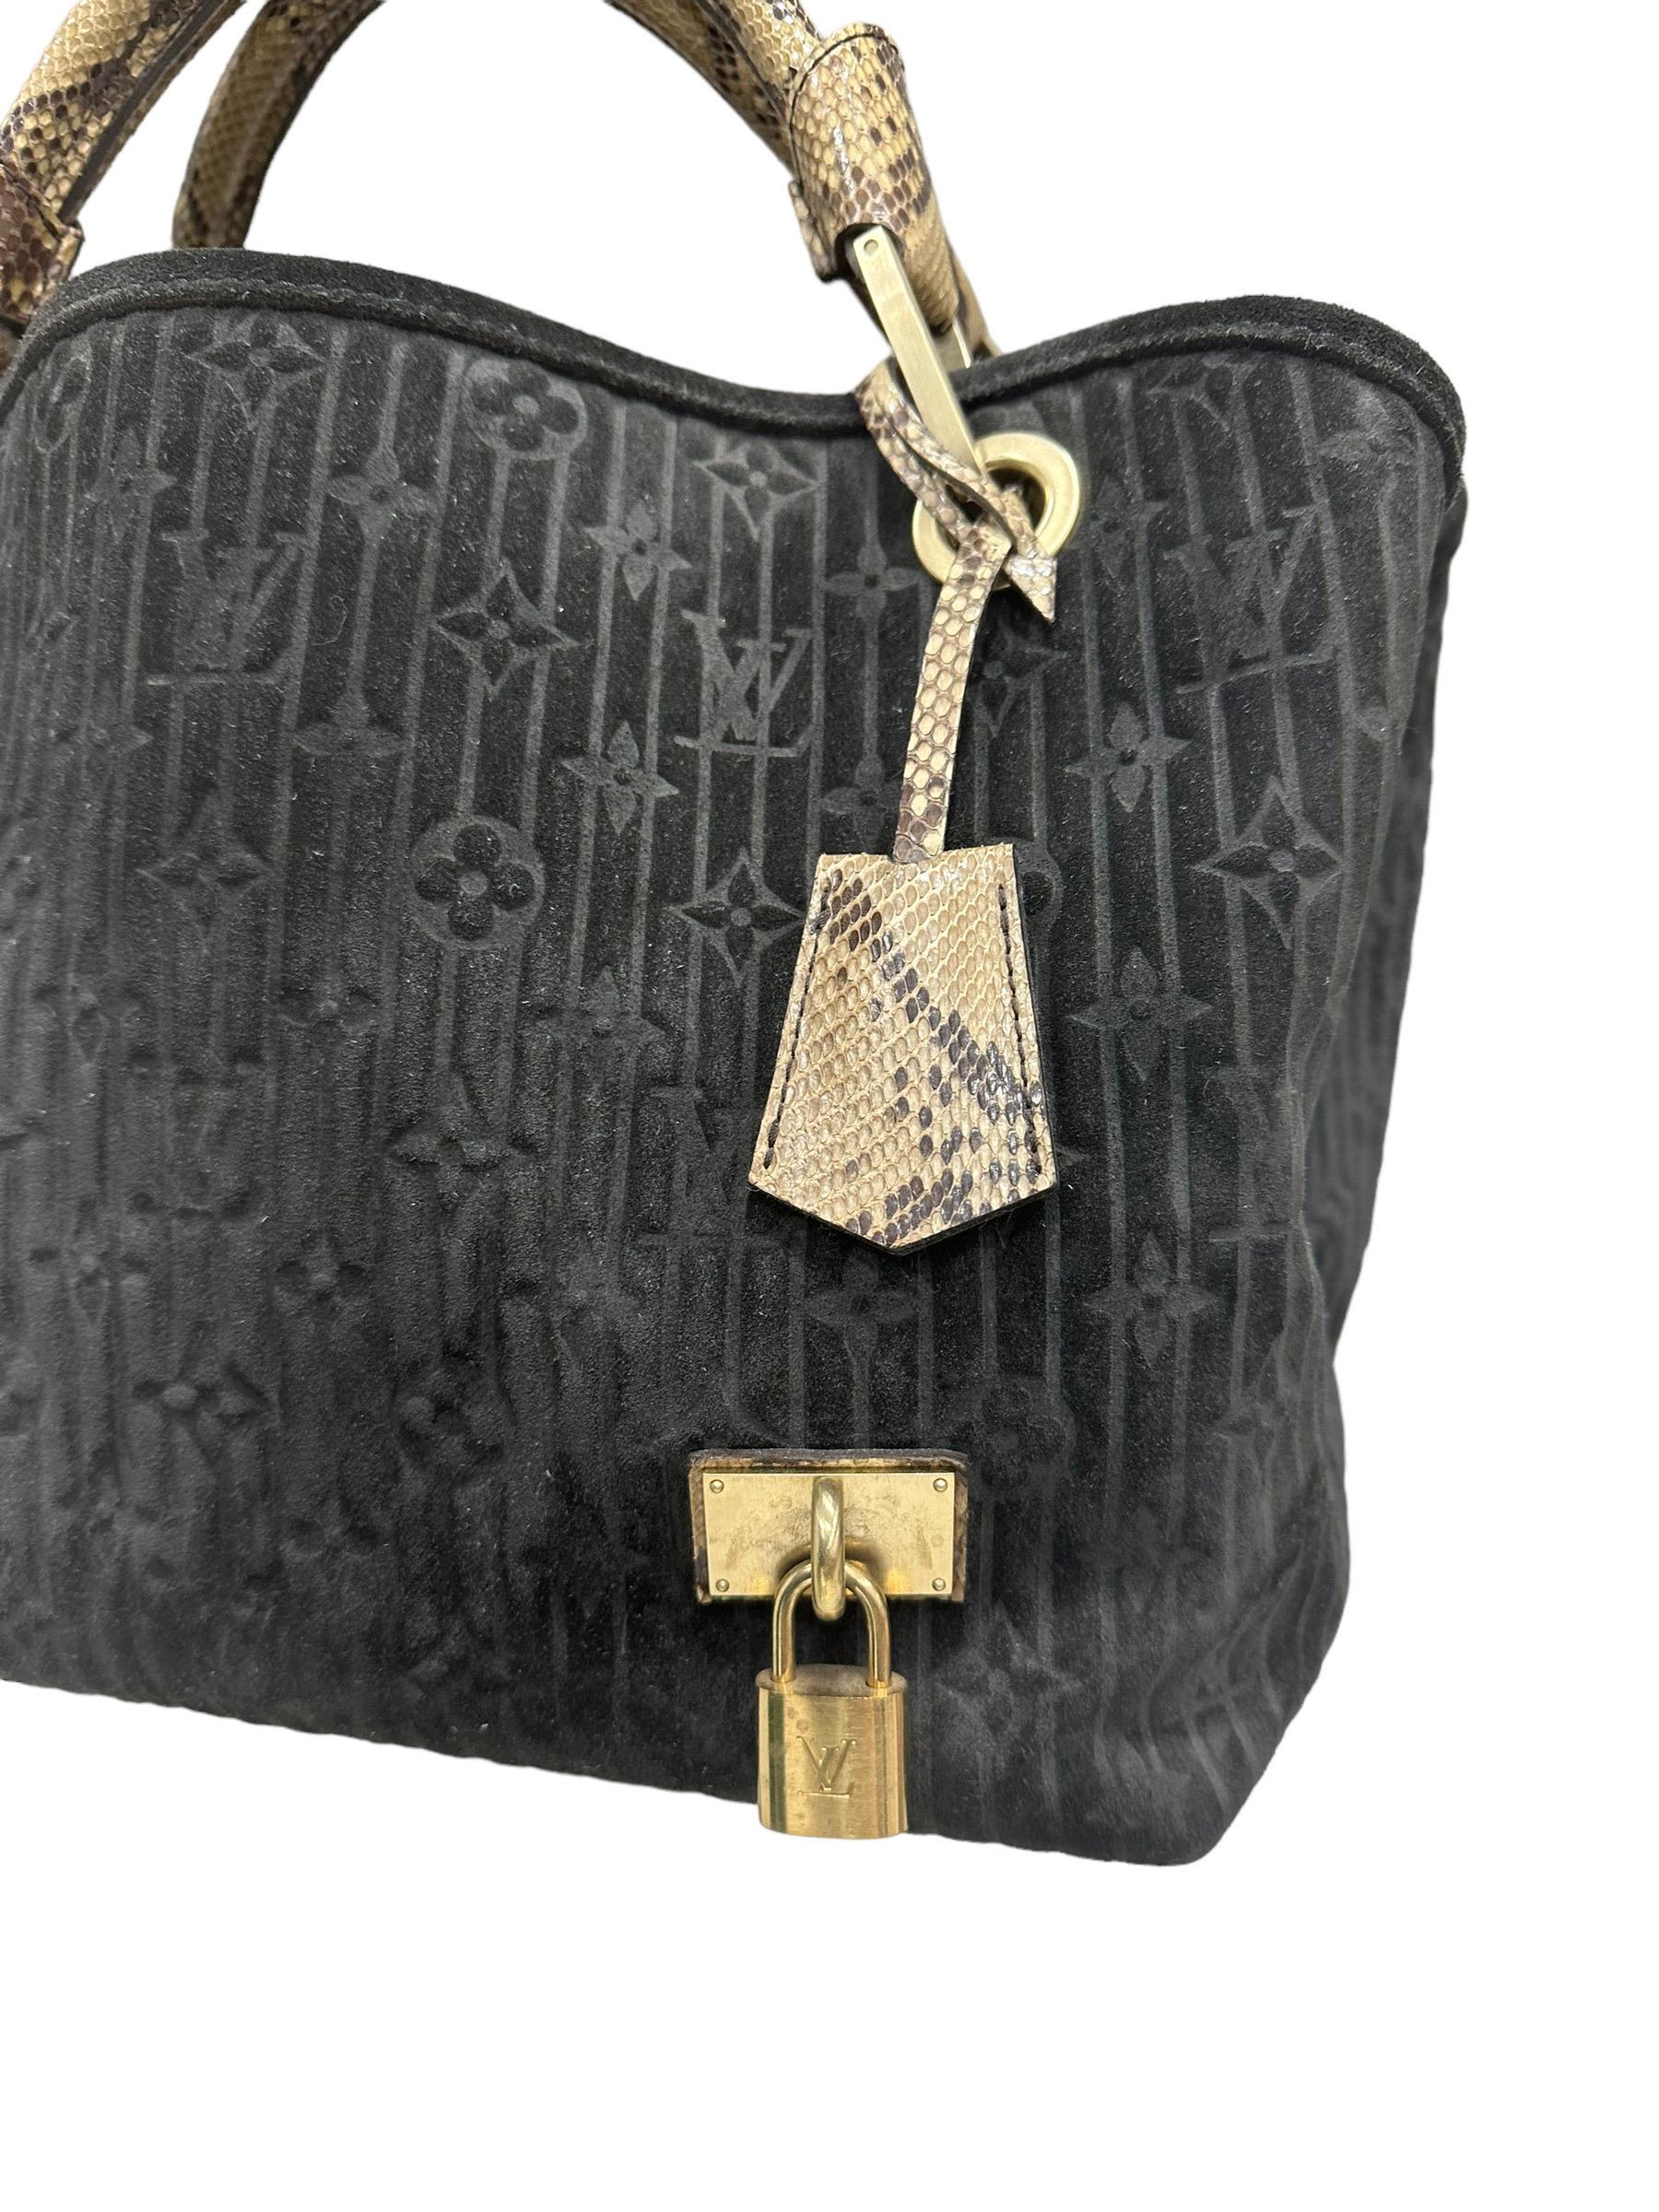 

Louis Vuitton bag, Whisper model, fall\winter 2008 collection, made in monogram patterned black suede, with python inserts and golden hardware. It is not equipped with any type of closure, but has a central pocket with zip closure, separating the